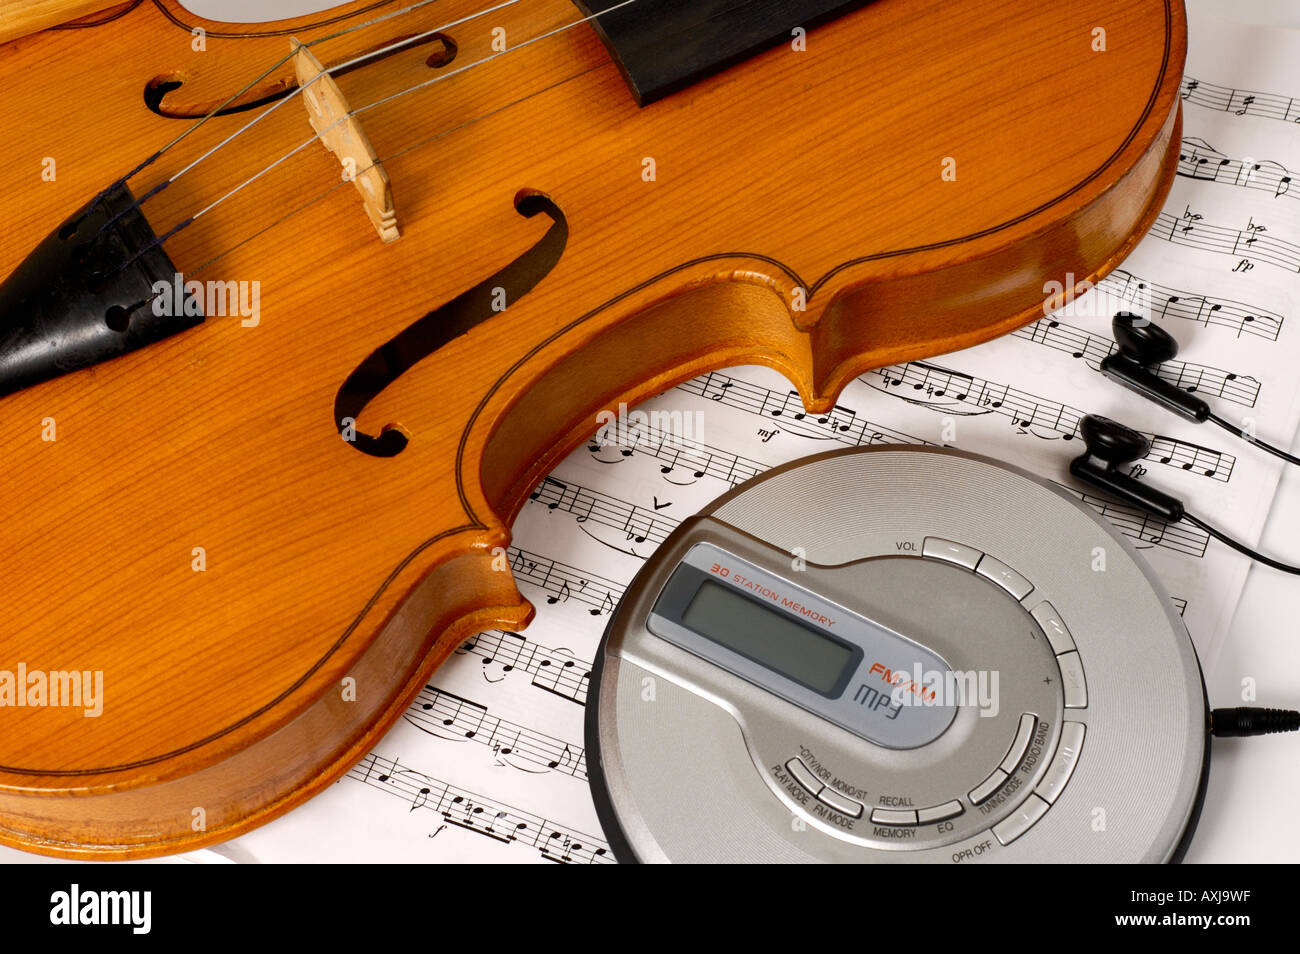 Violin and CD MP3 player New generation contemporary technologies music and musical instruments artistic conceptual still life Stock Photo